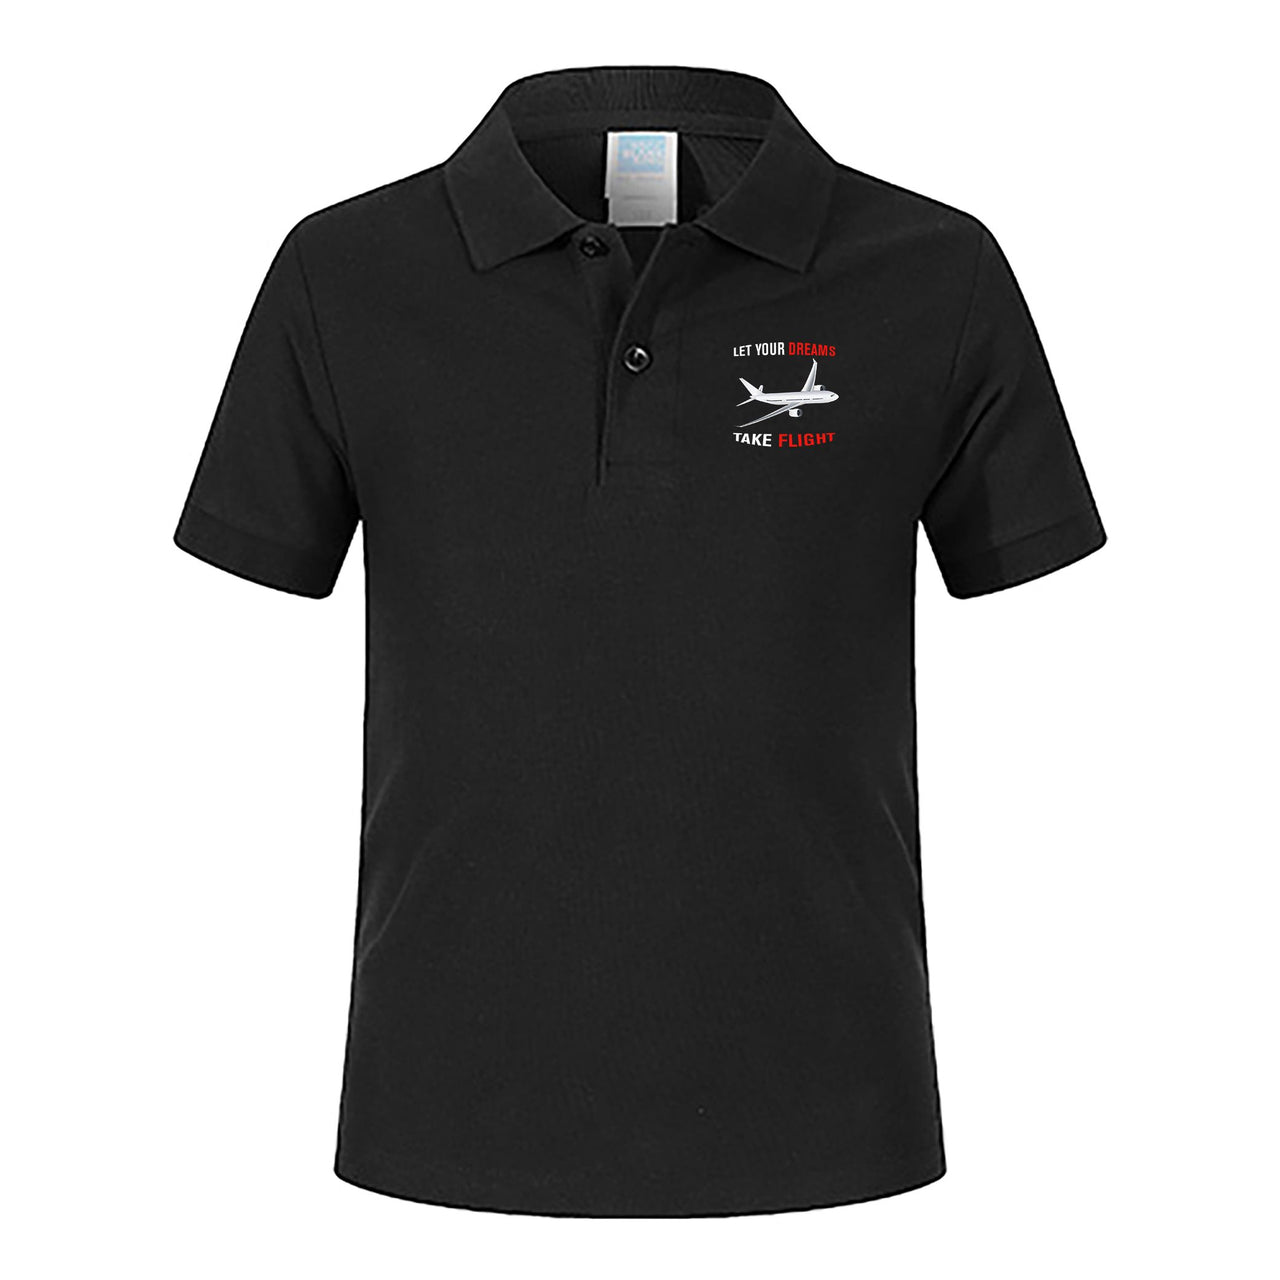 Let Your Dreams Take Flight Designed Children Polo T-Shirts